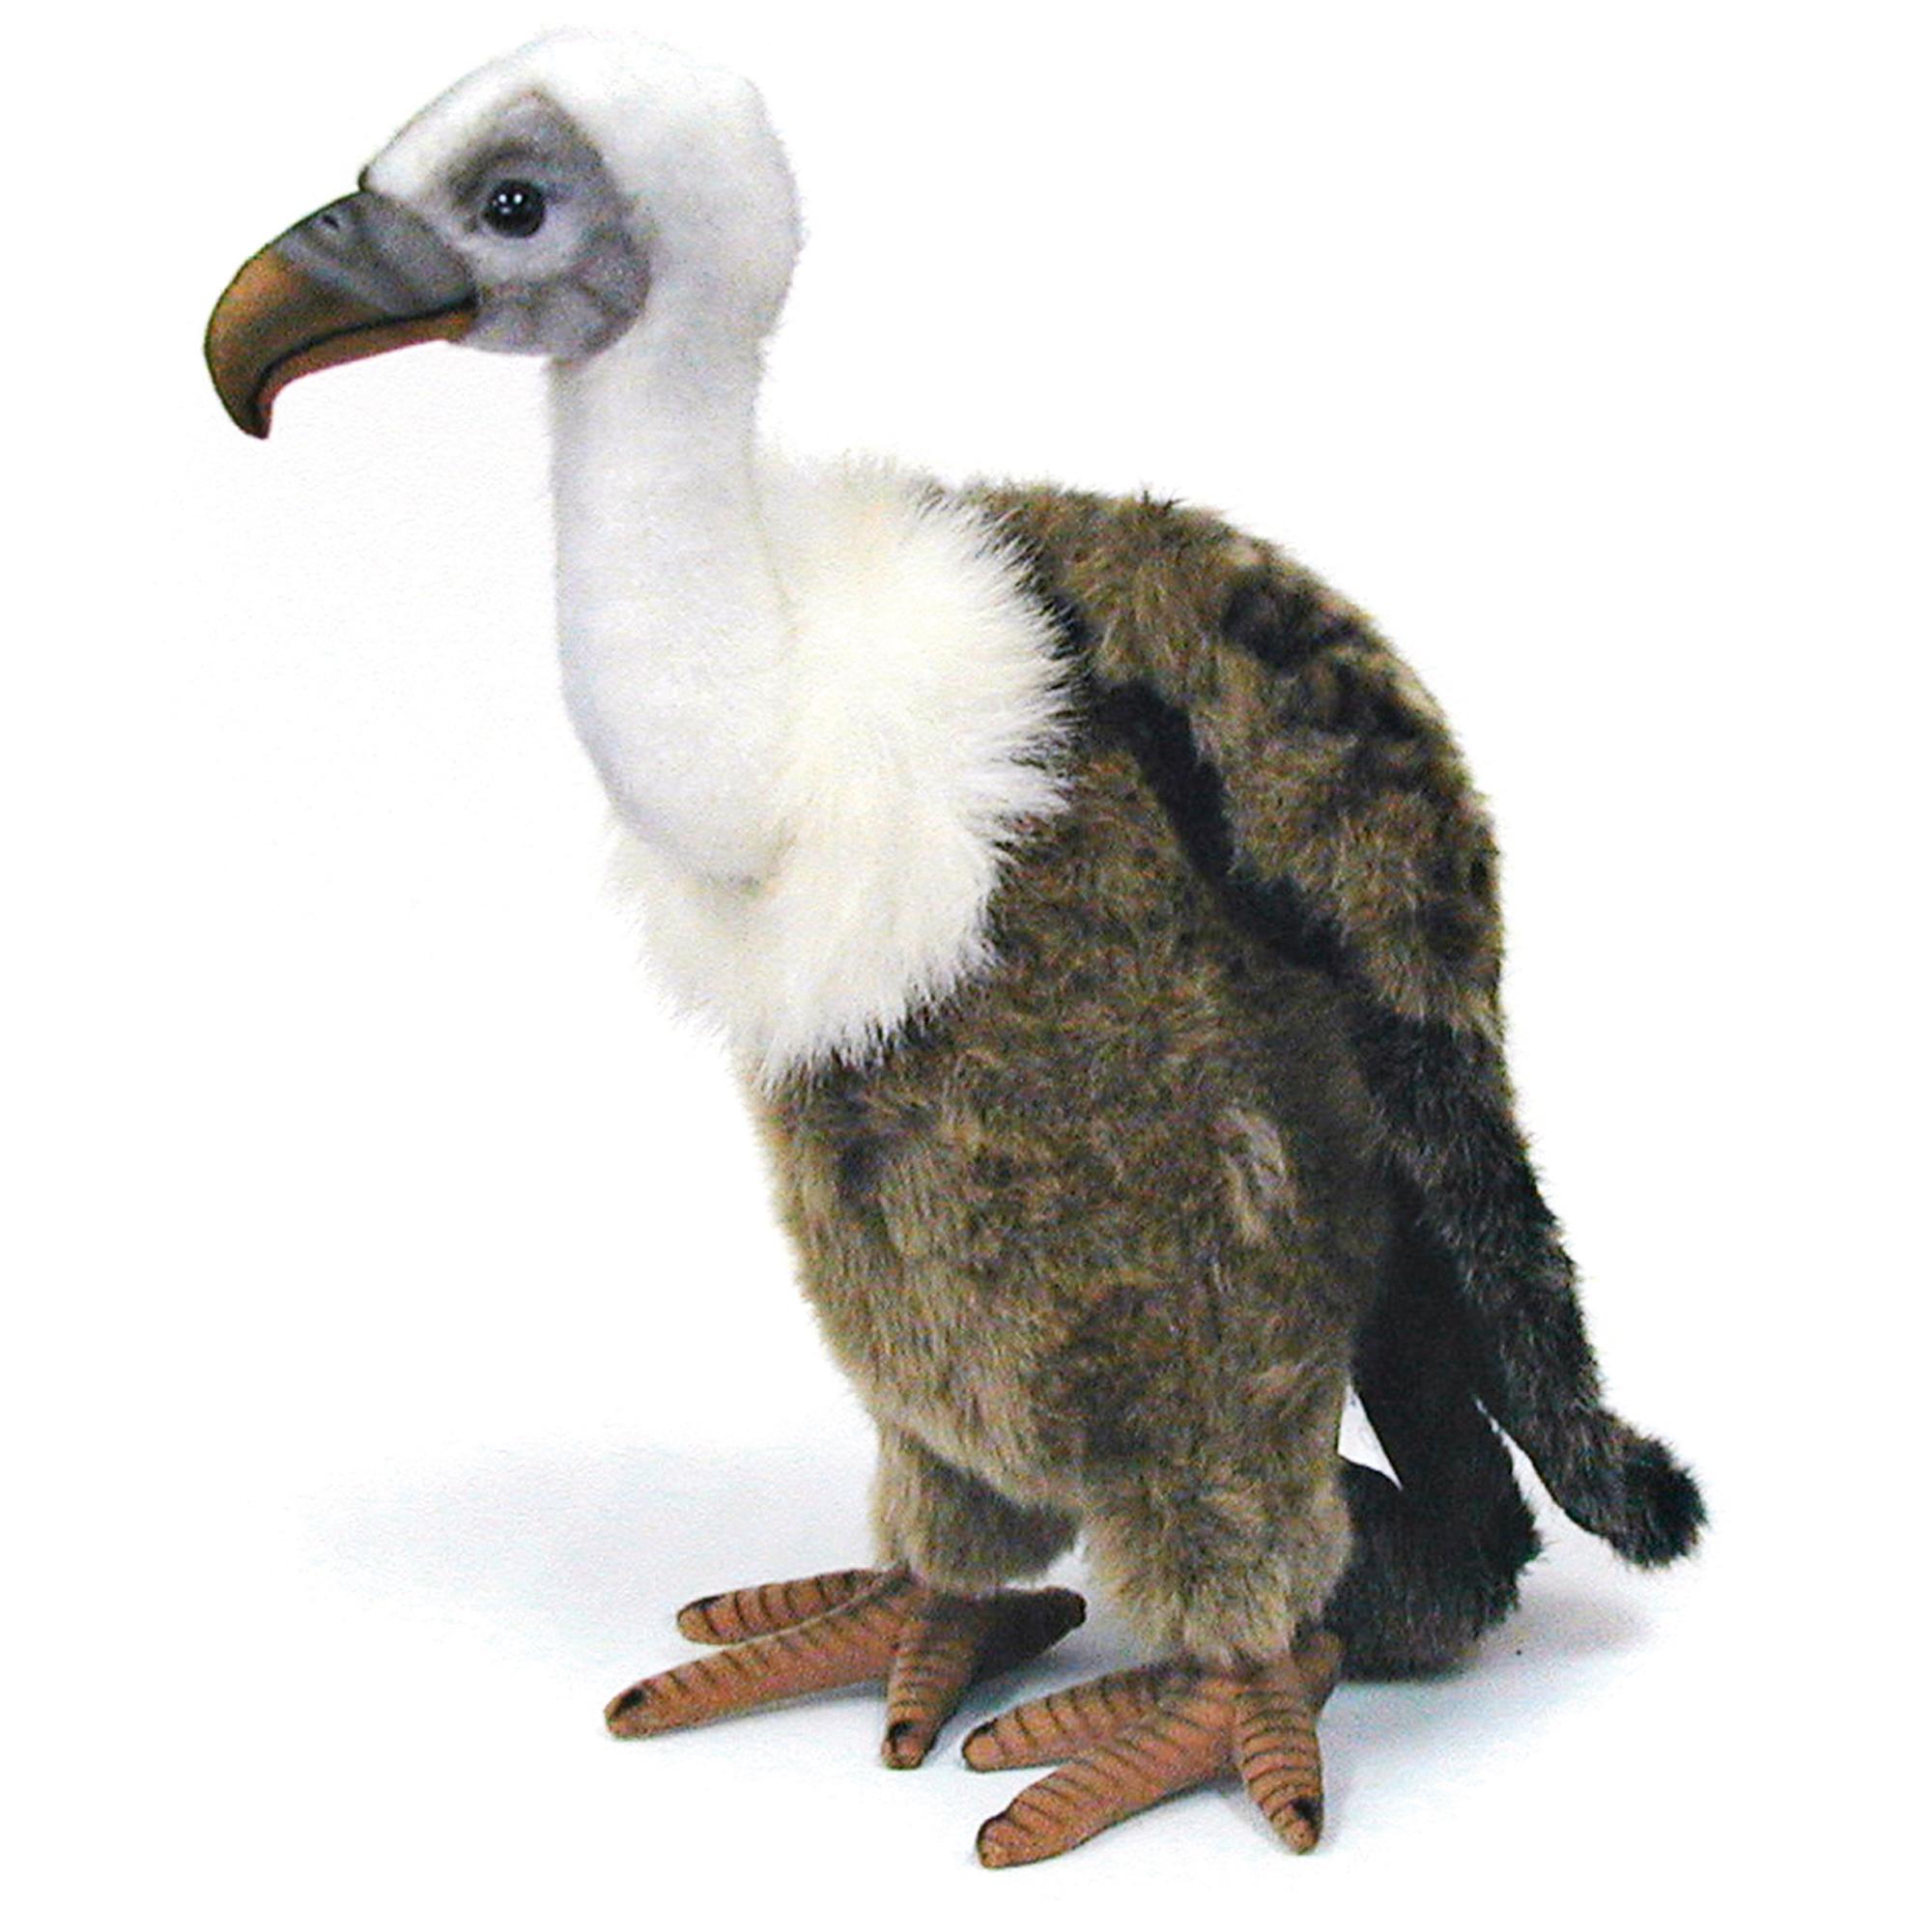 Hansa Toys Vulture 30cm - £55.00 - Hamleys for Toys and Games